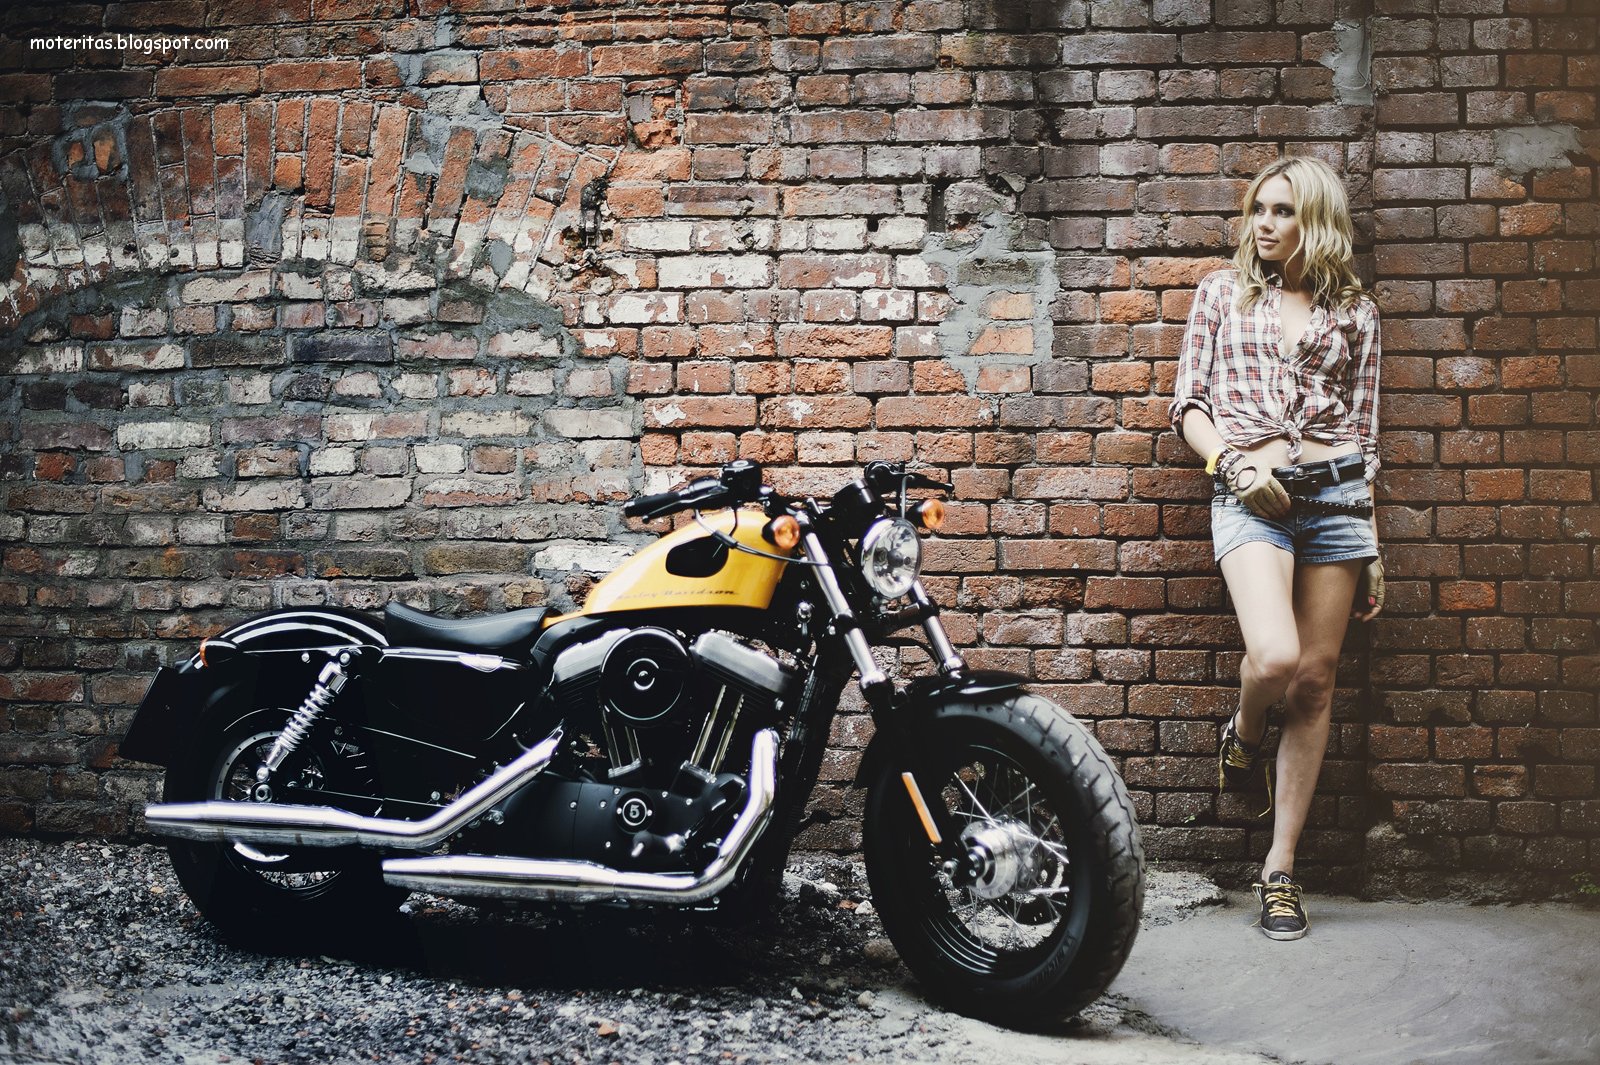 Motos y mujeres resolucin HD Harley Davidson Forty Eight sportster